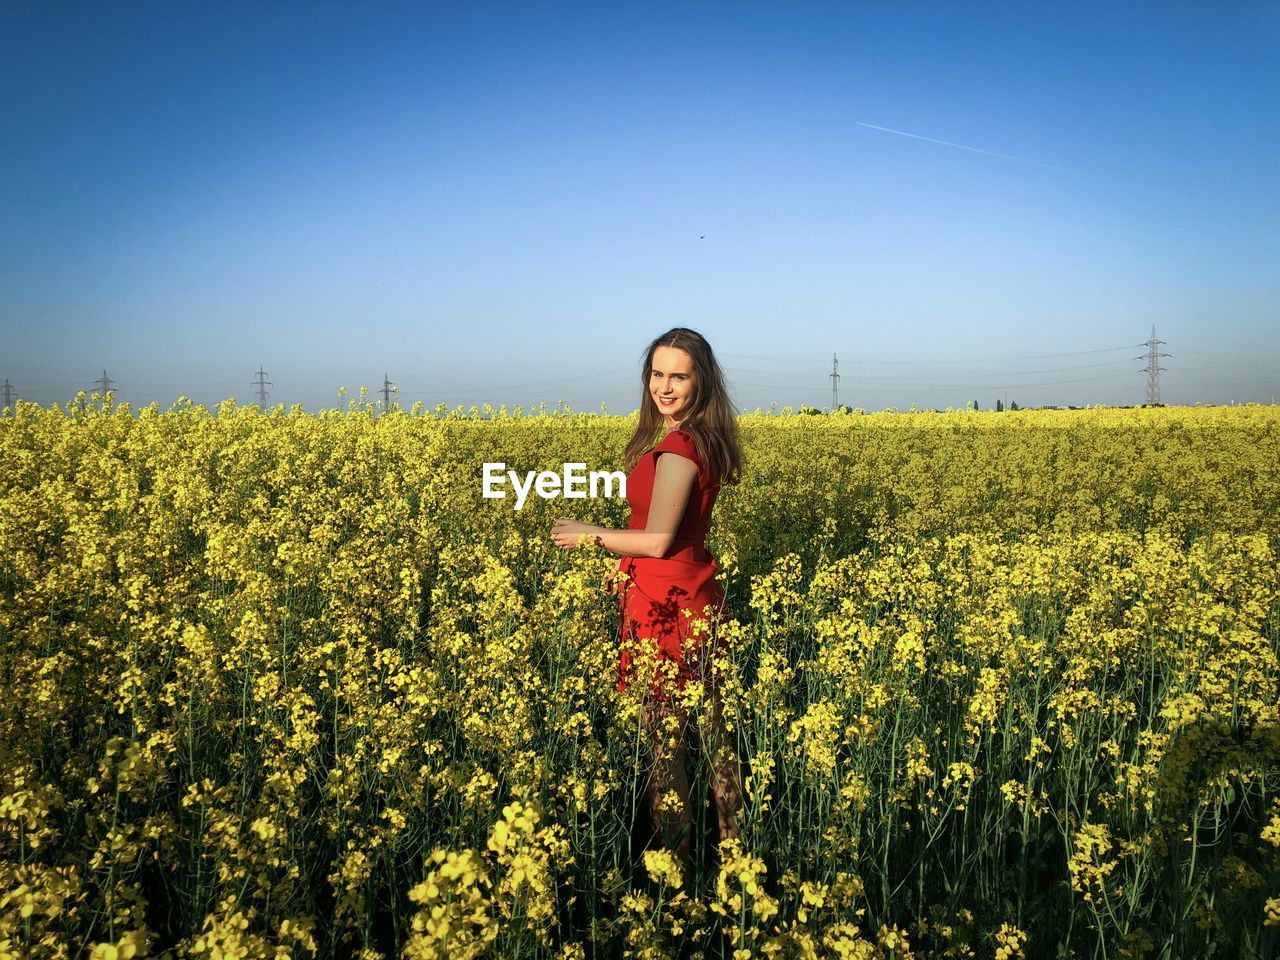 Woman in red dress in a field of canola flowers